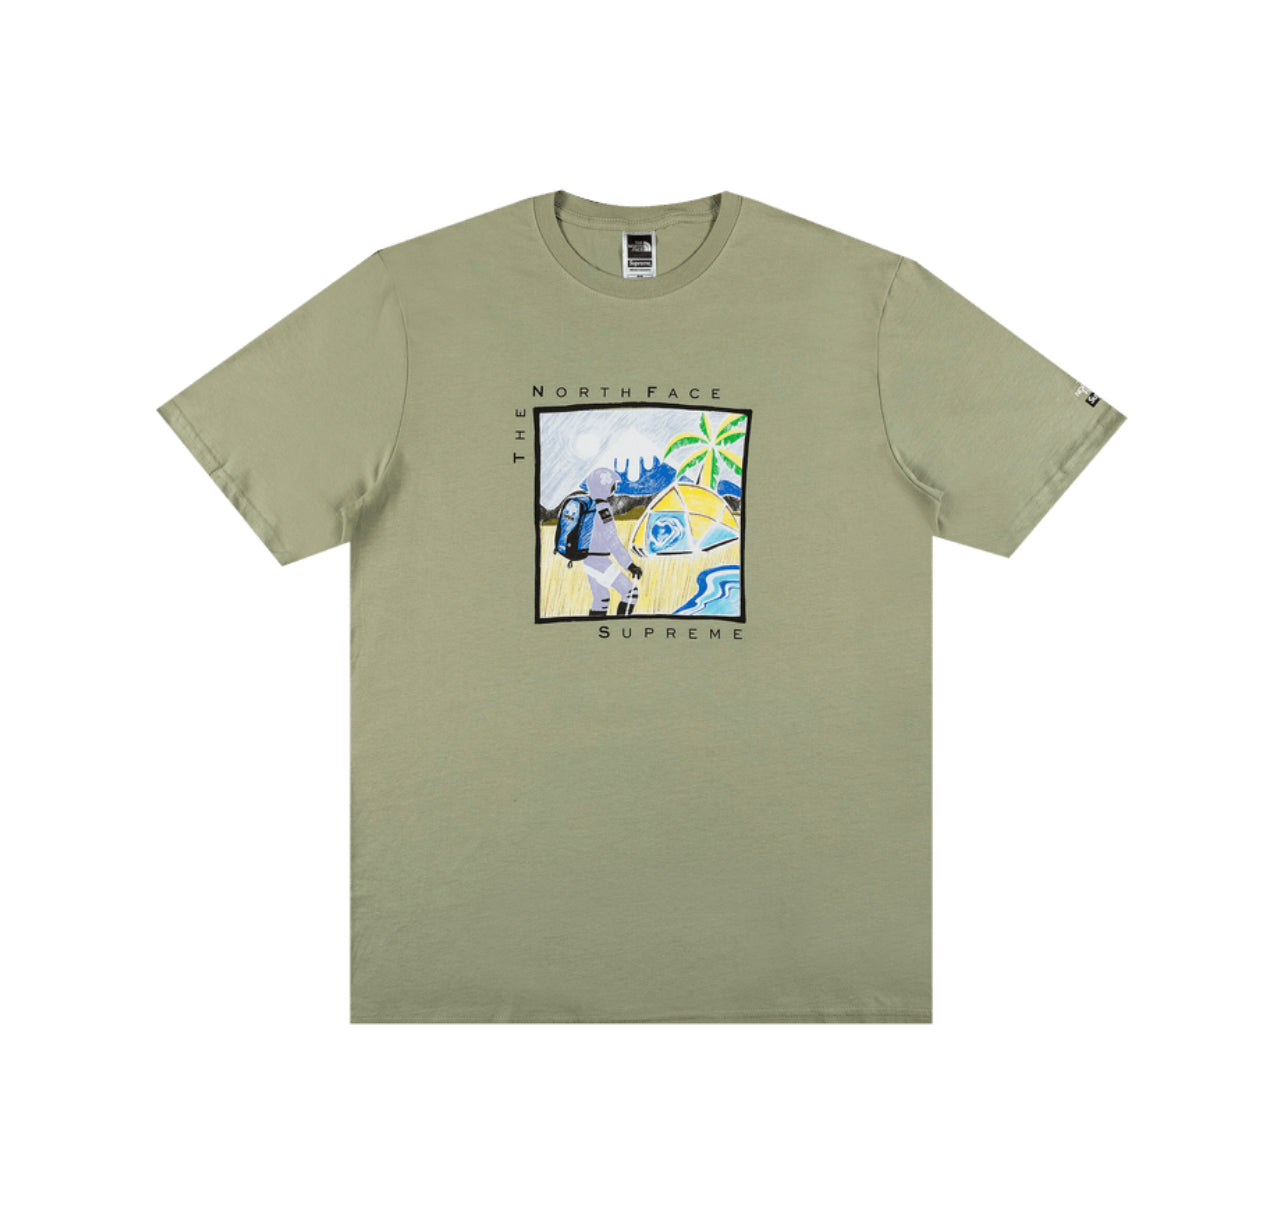 Supreme x The North Face Sketch S/S Tee